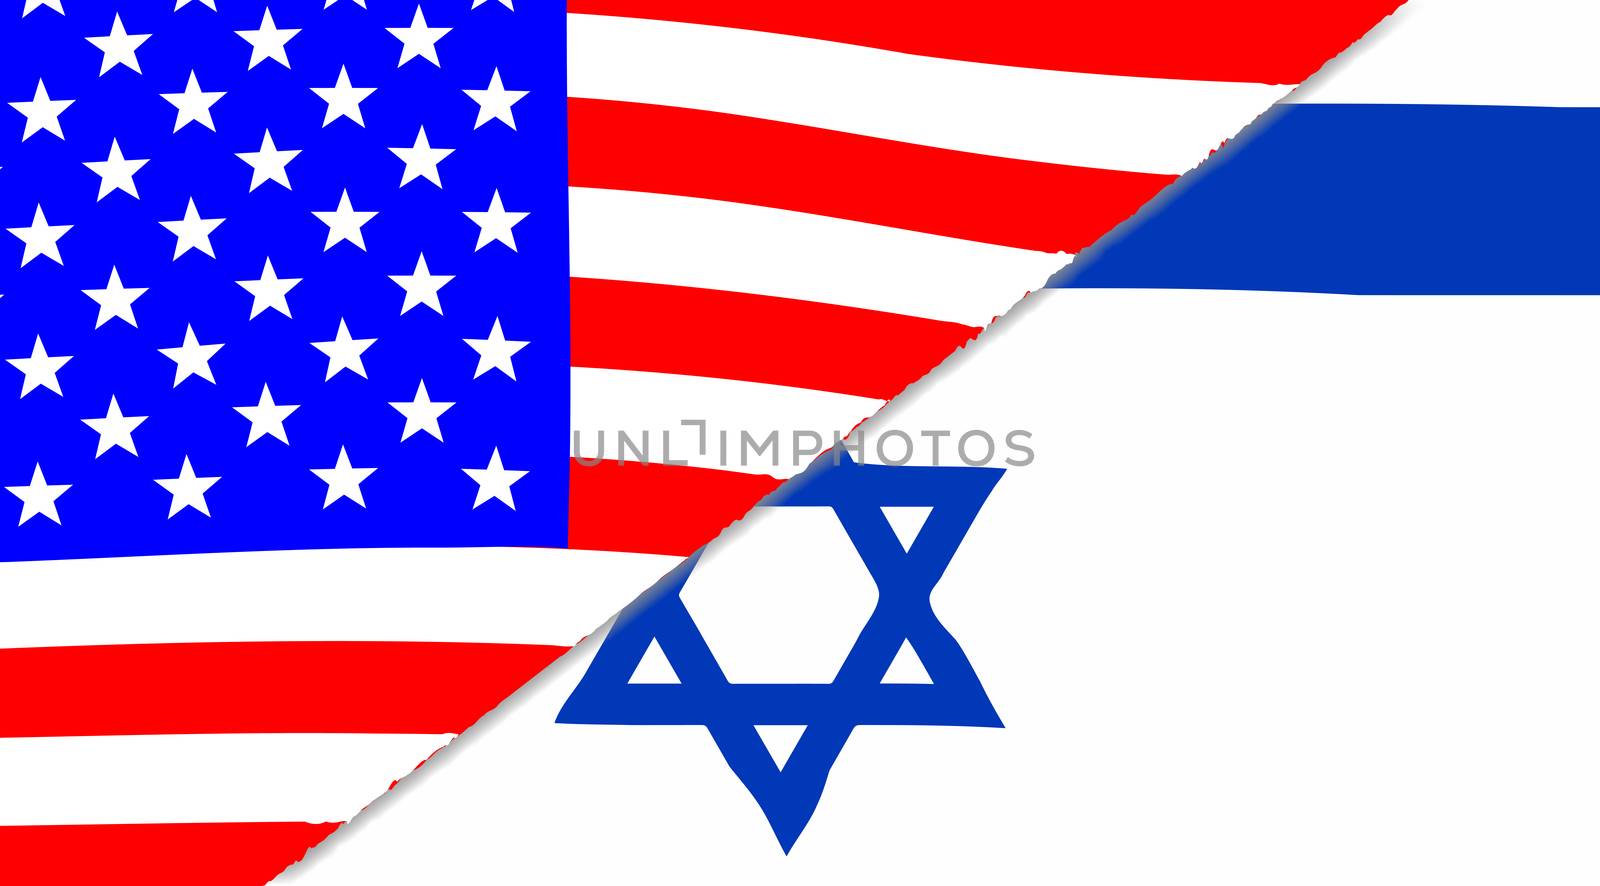 The Jewish and American flags sectioned together